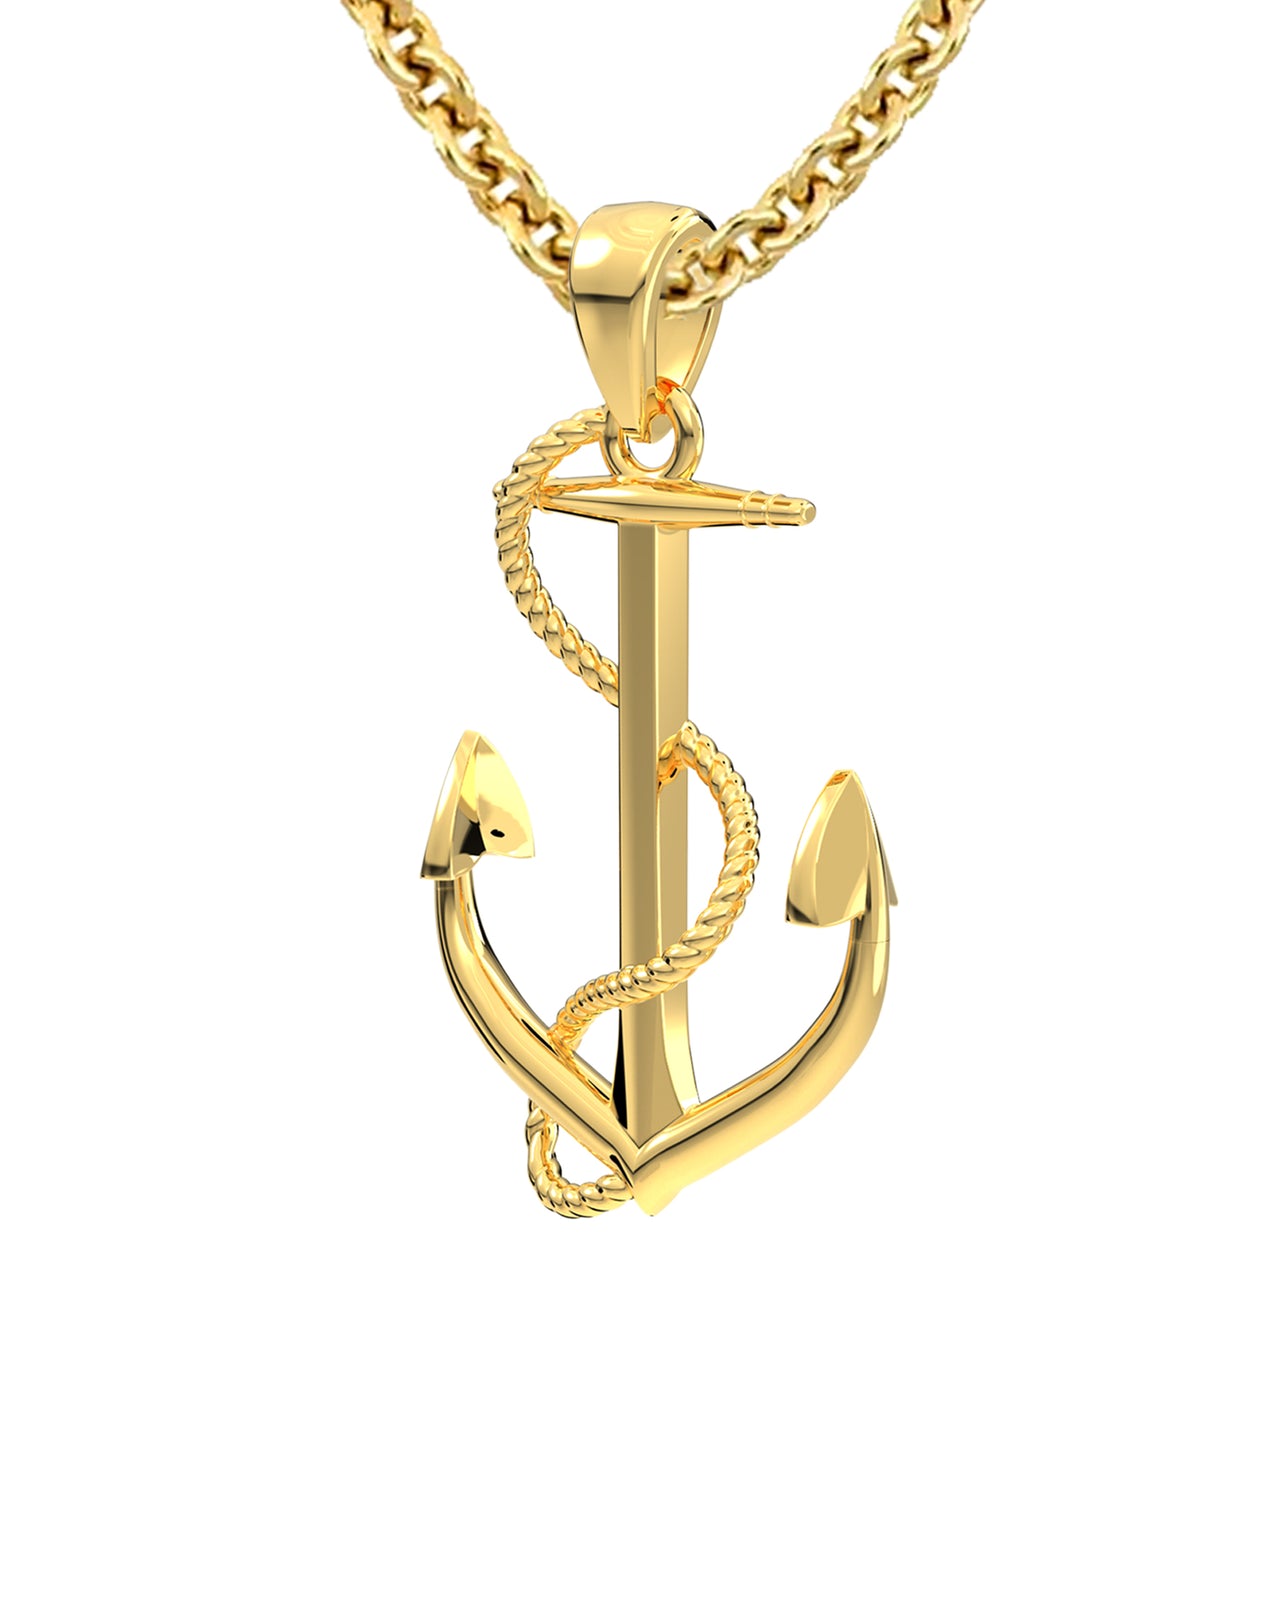 Solid 14k Yellow Gold Nautical Maritime Anchor Pendant Necklace, 30mm